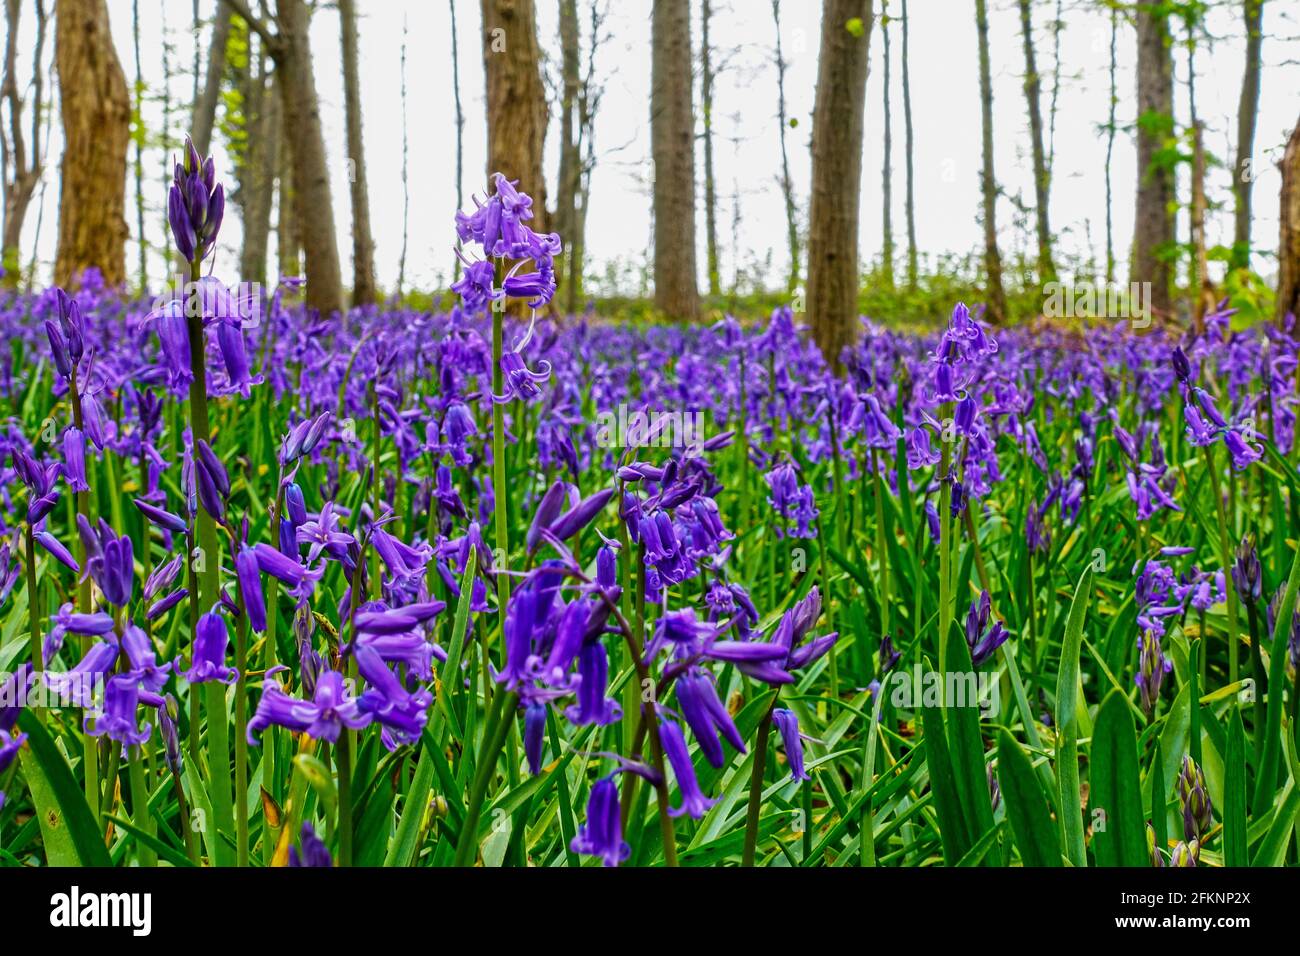 Carpet of beautiful bluebell flowers, Hyacinthoides non-scripta, in a forest at the town of Baal, Germany Stock Photo